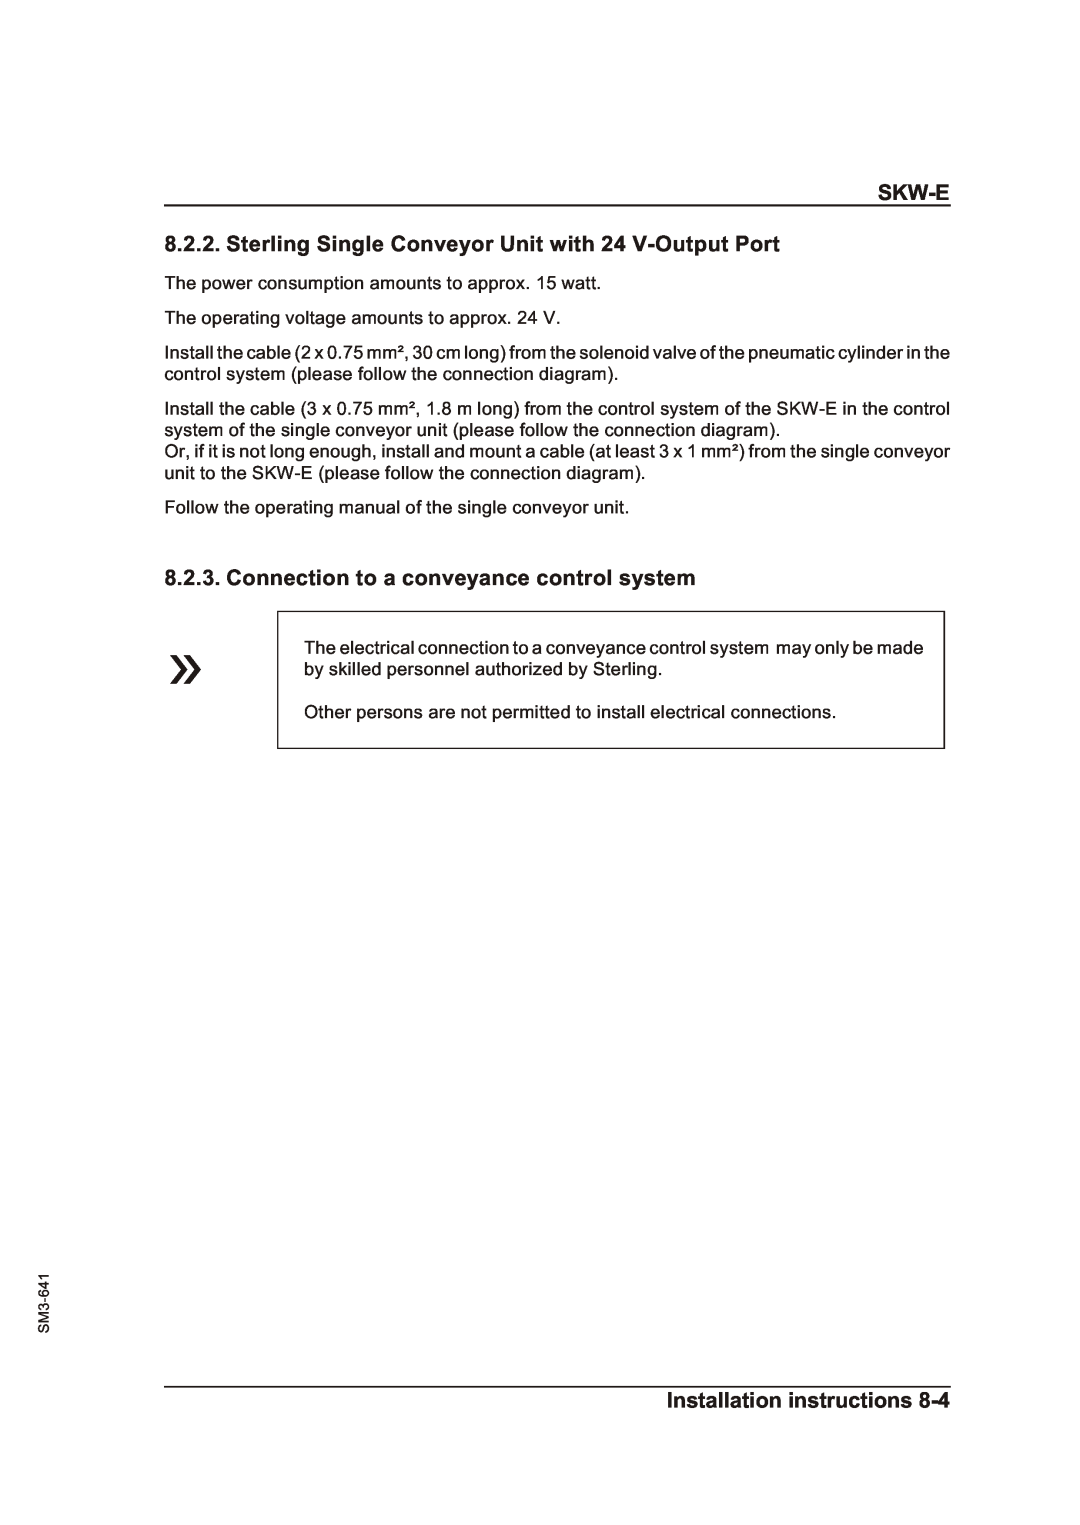 Sterling Plumbing SKW-E manual Connection to a conveyance control system, Skw-E, Installation instructions 